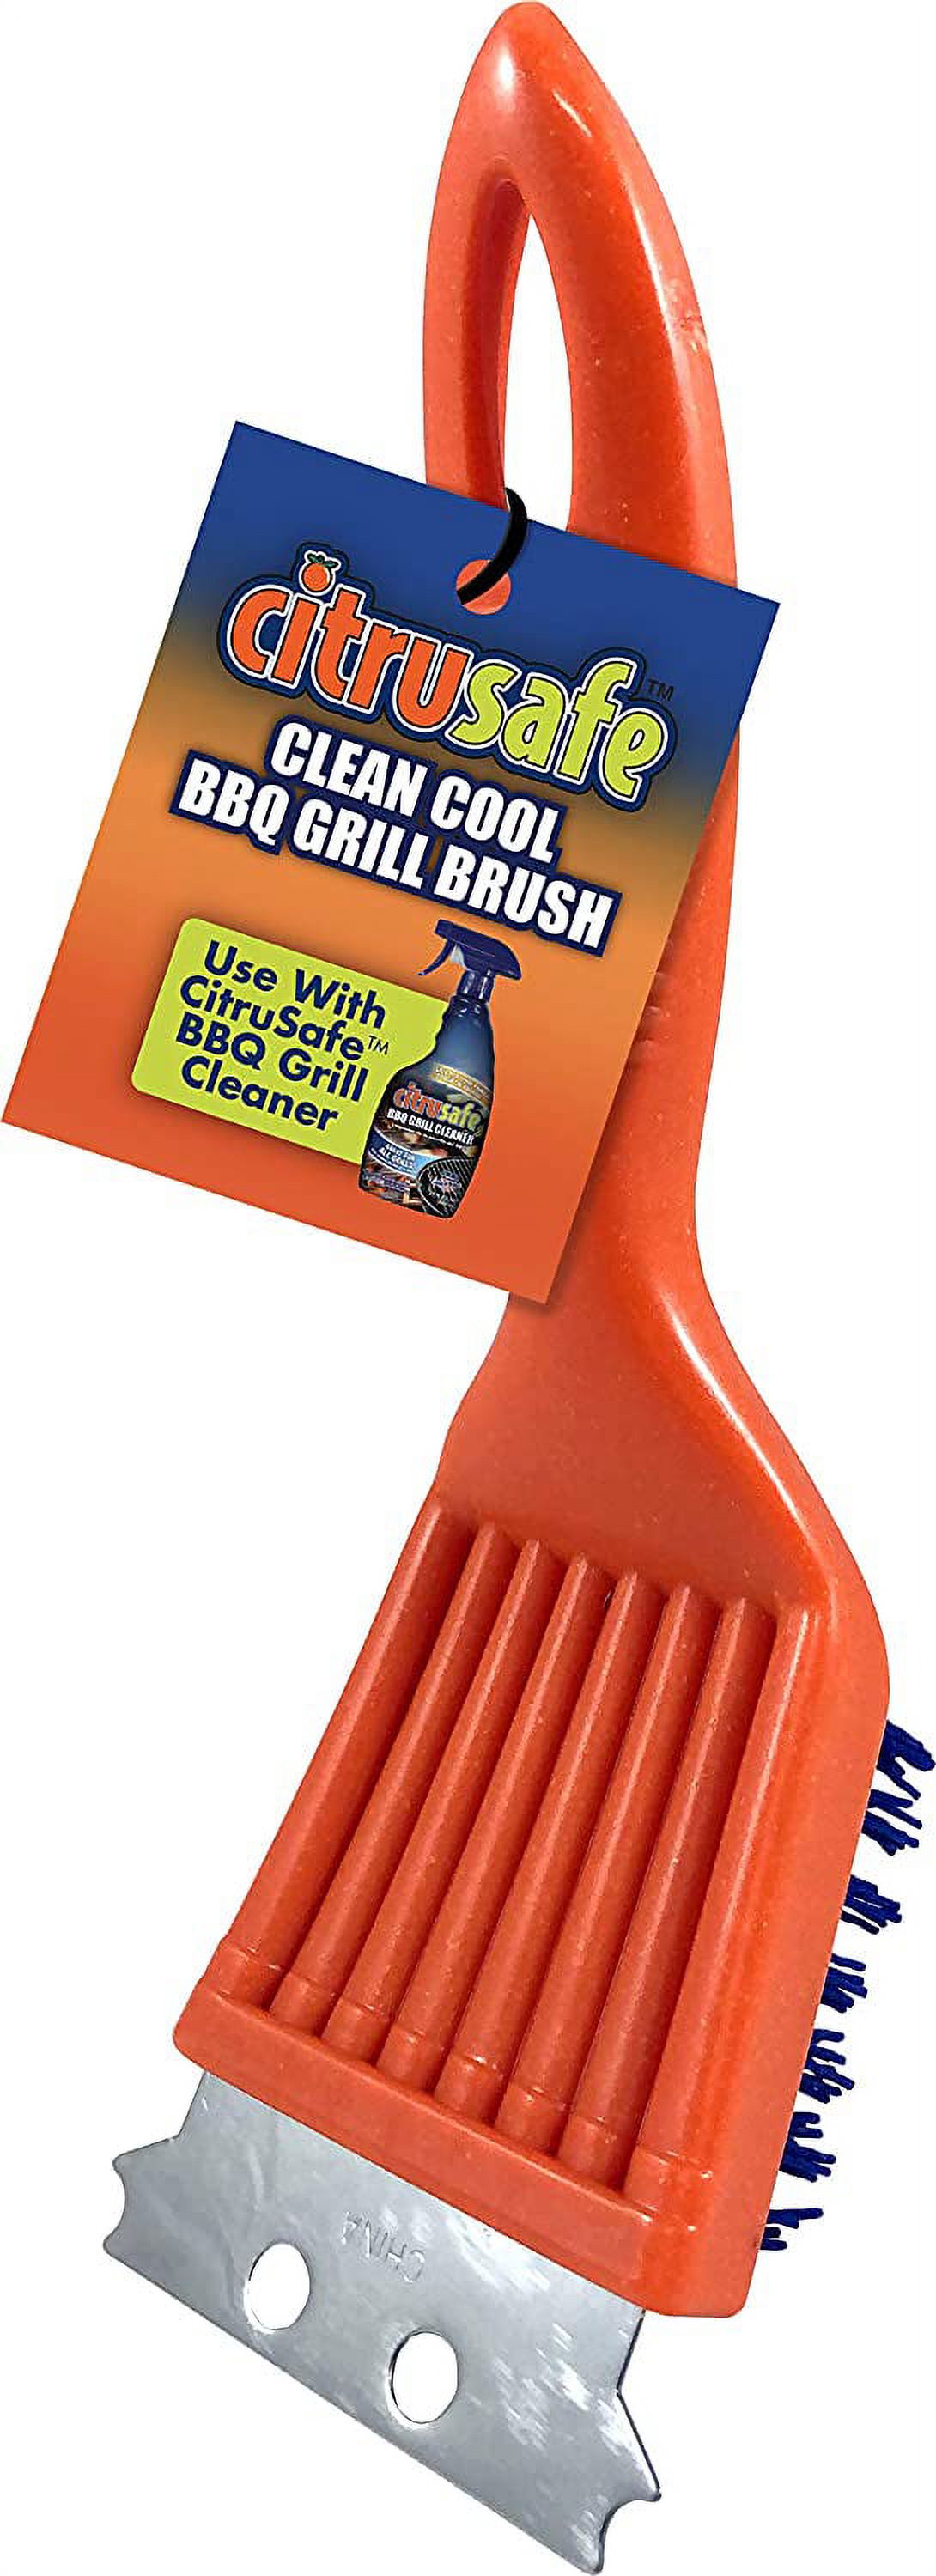 Citrusafe Clean Cool BBQ Grill Brush - Removes Grease and Burnt Food Safely from Gas and Charcoal Grill Grates - image 1 of 3